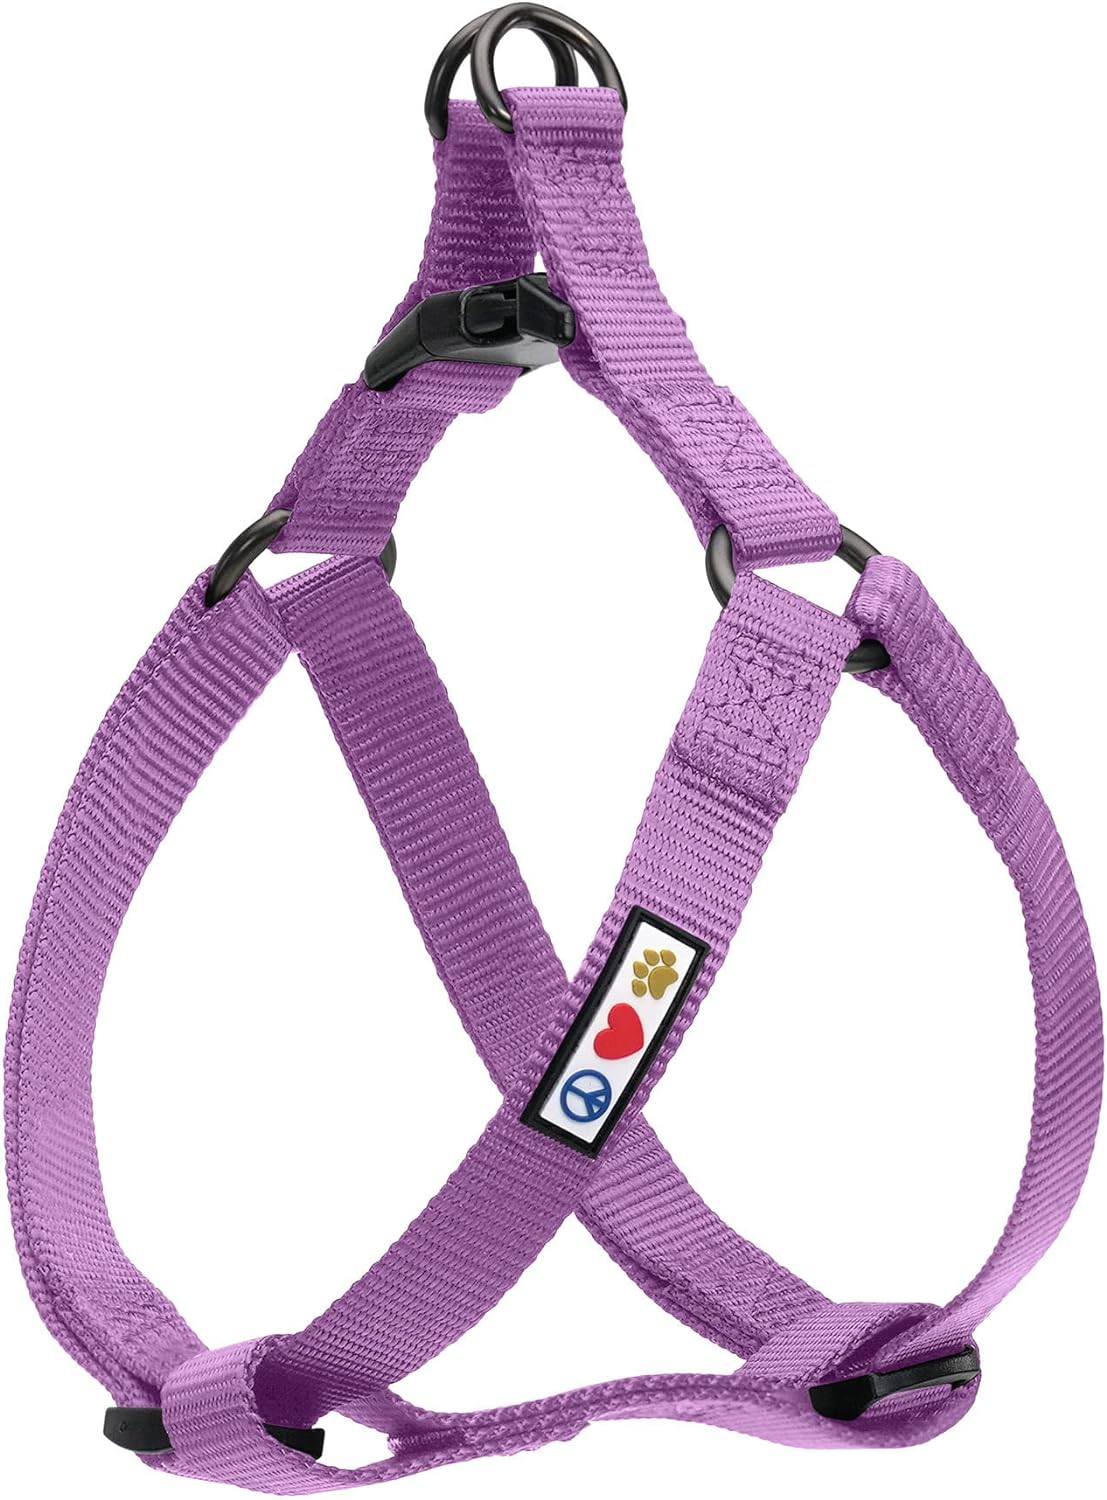 PAWTITAS Extra Small Dog Harness Adjustable Dog Harness No Pull Harness For Dogs Solid Color XS Orchid Purple Harness